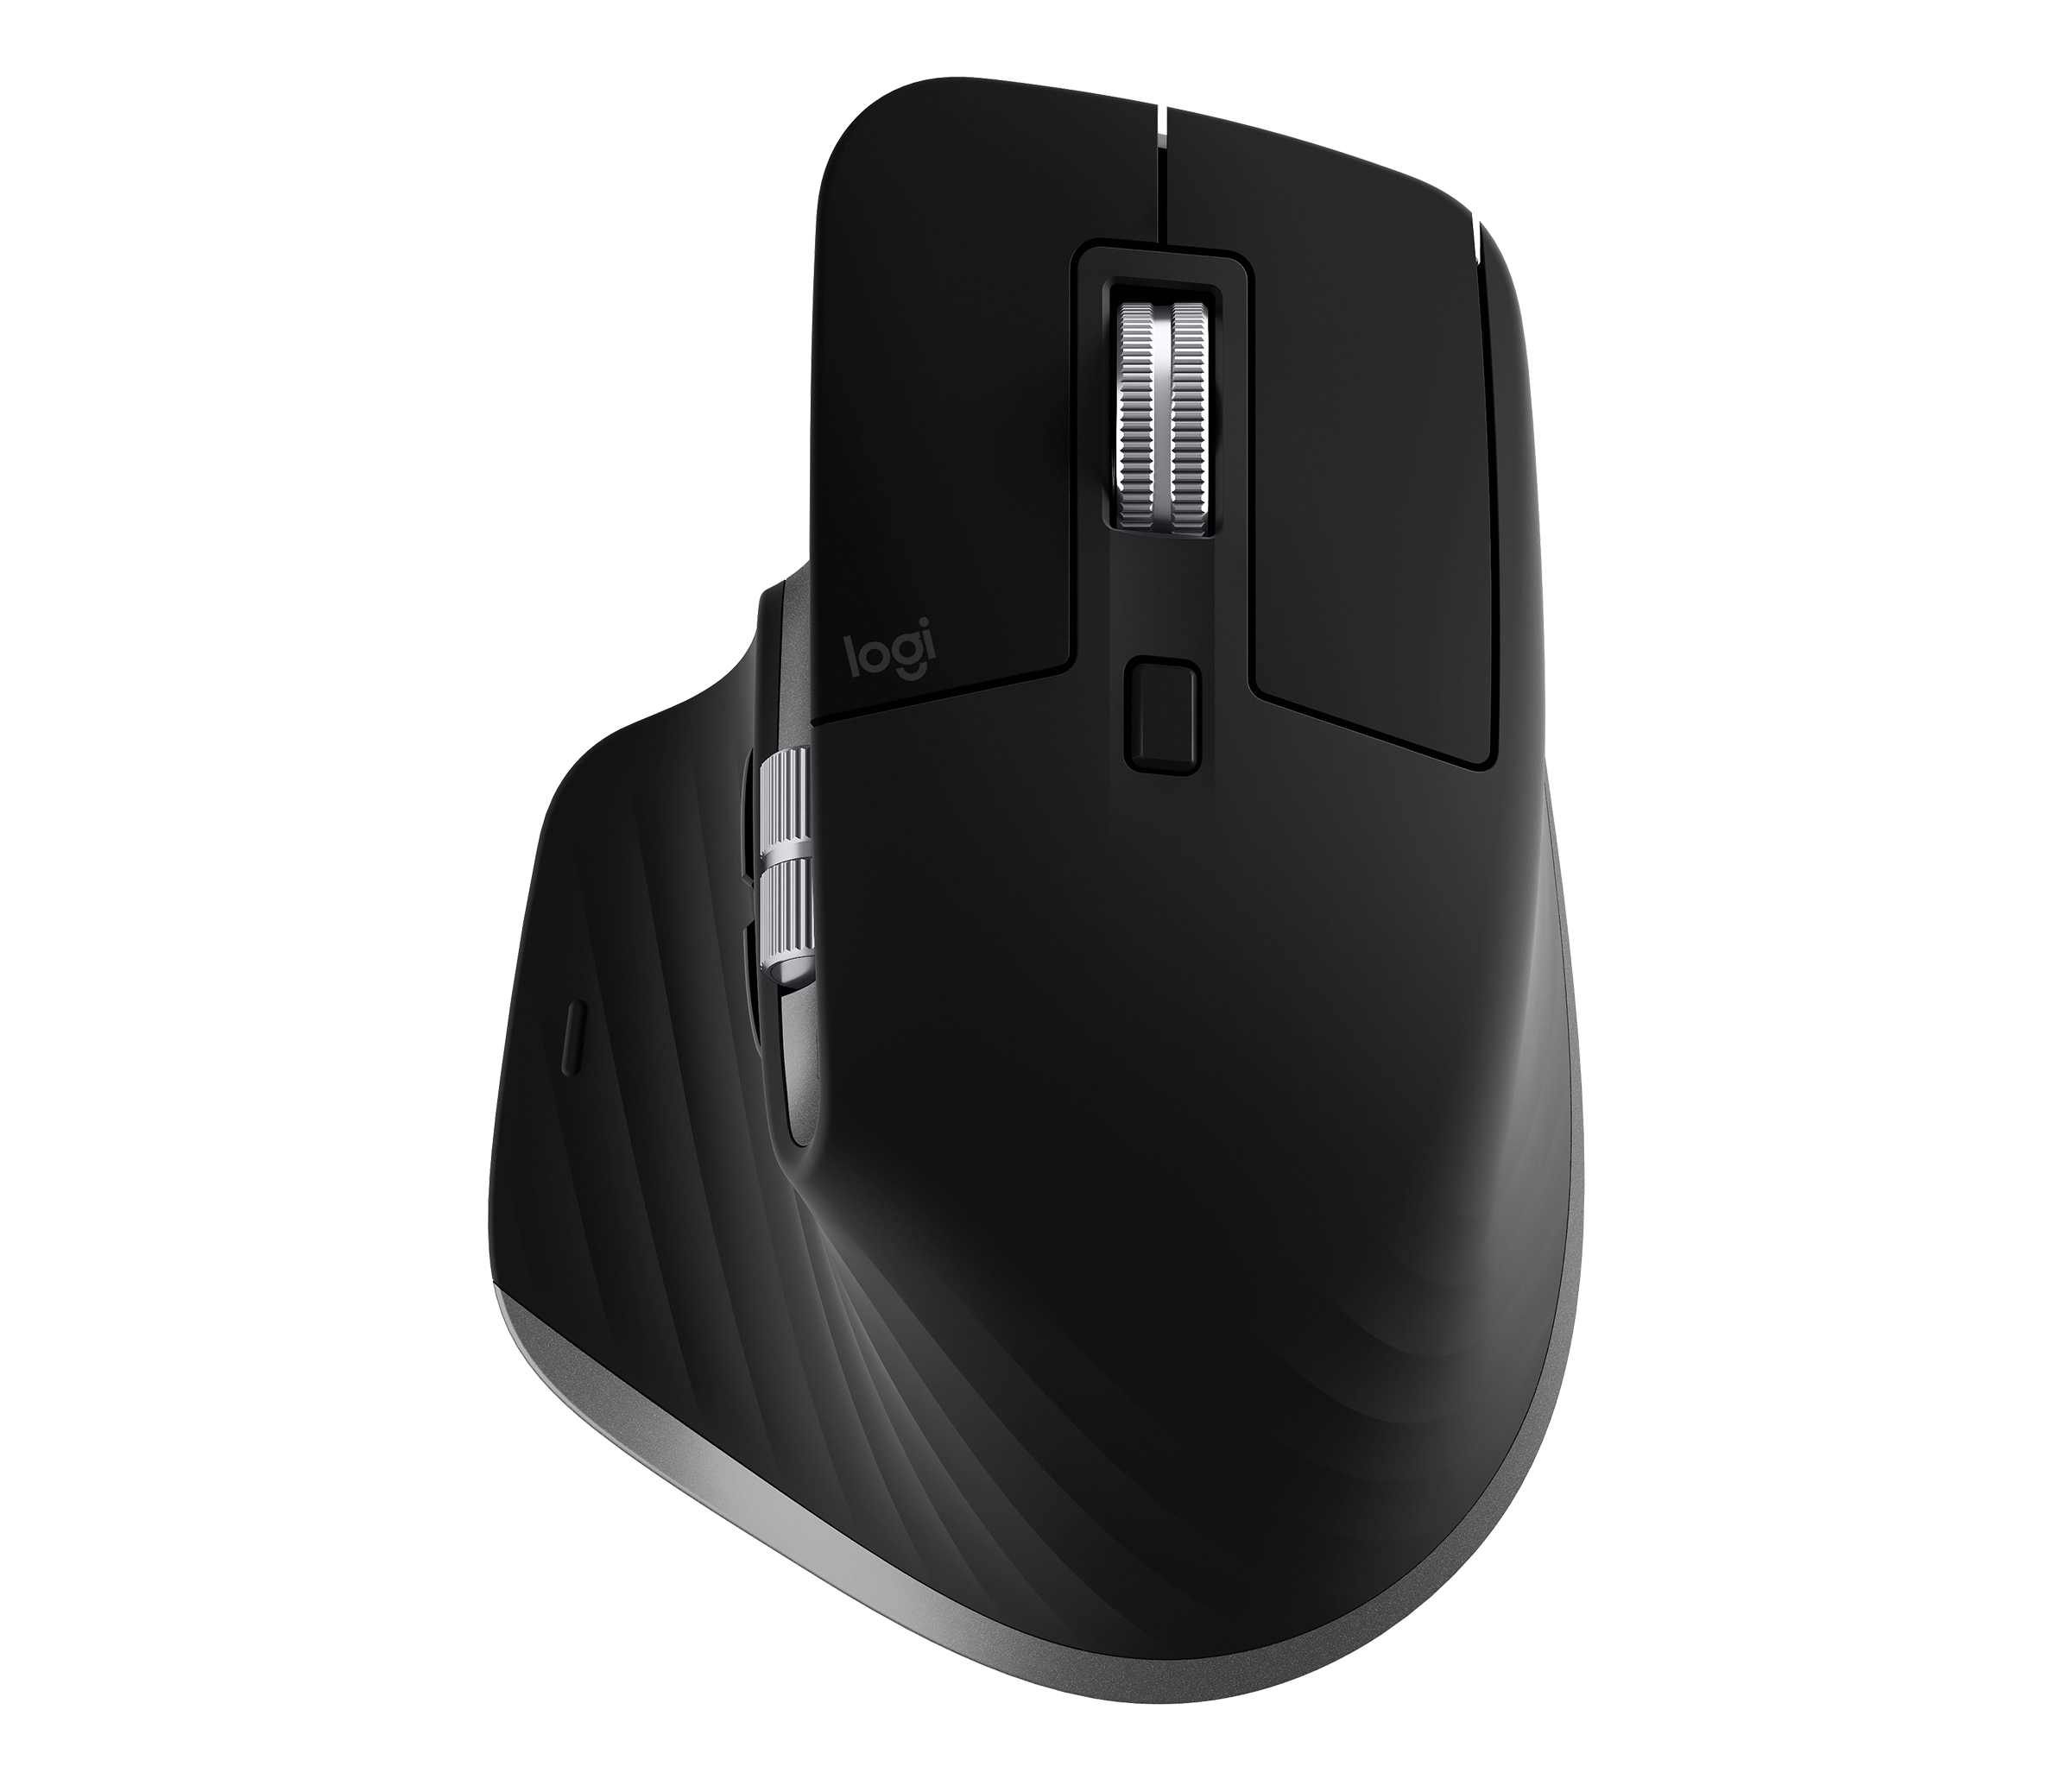 Compatible Mice For Mac